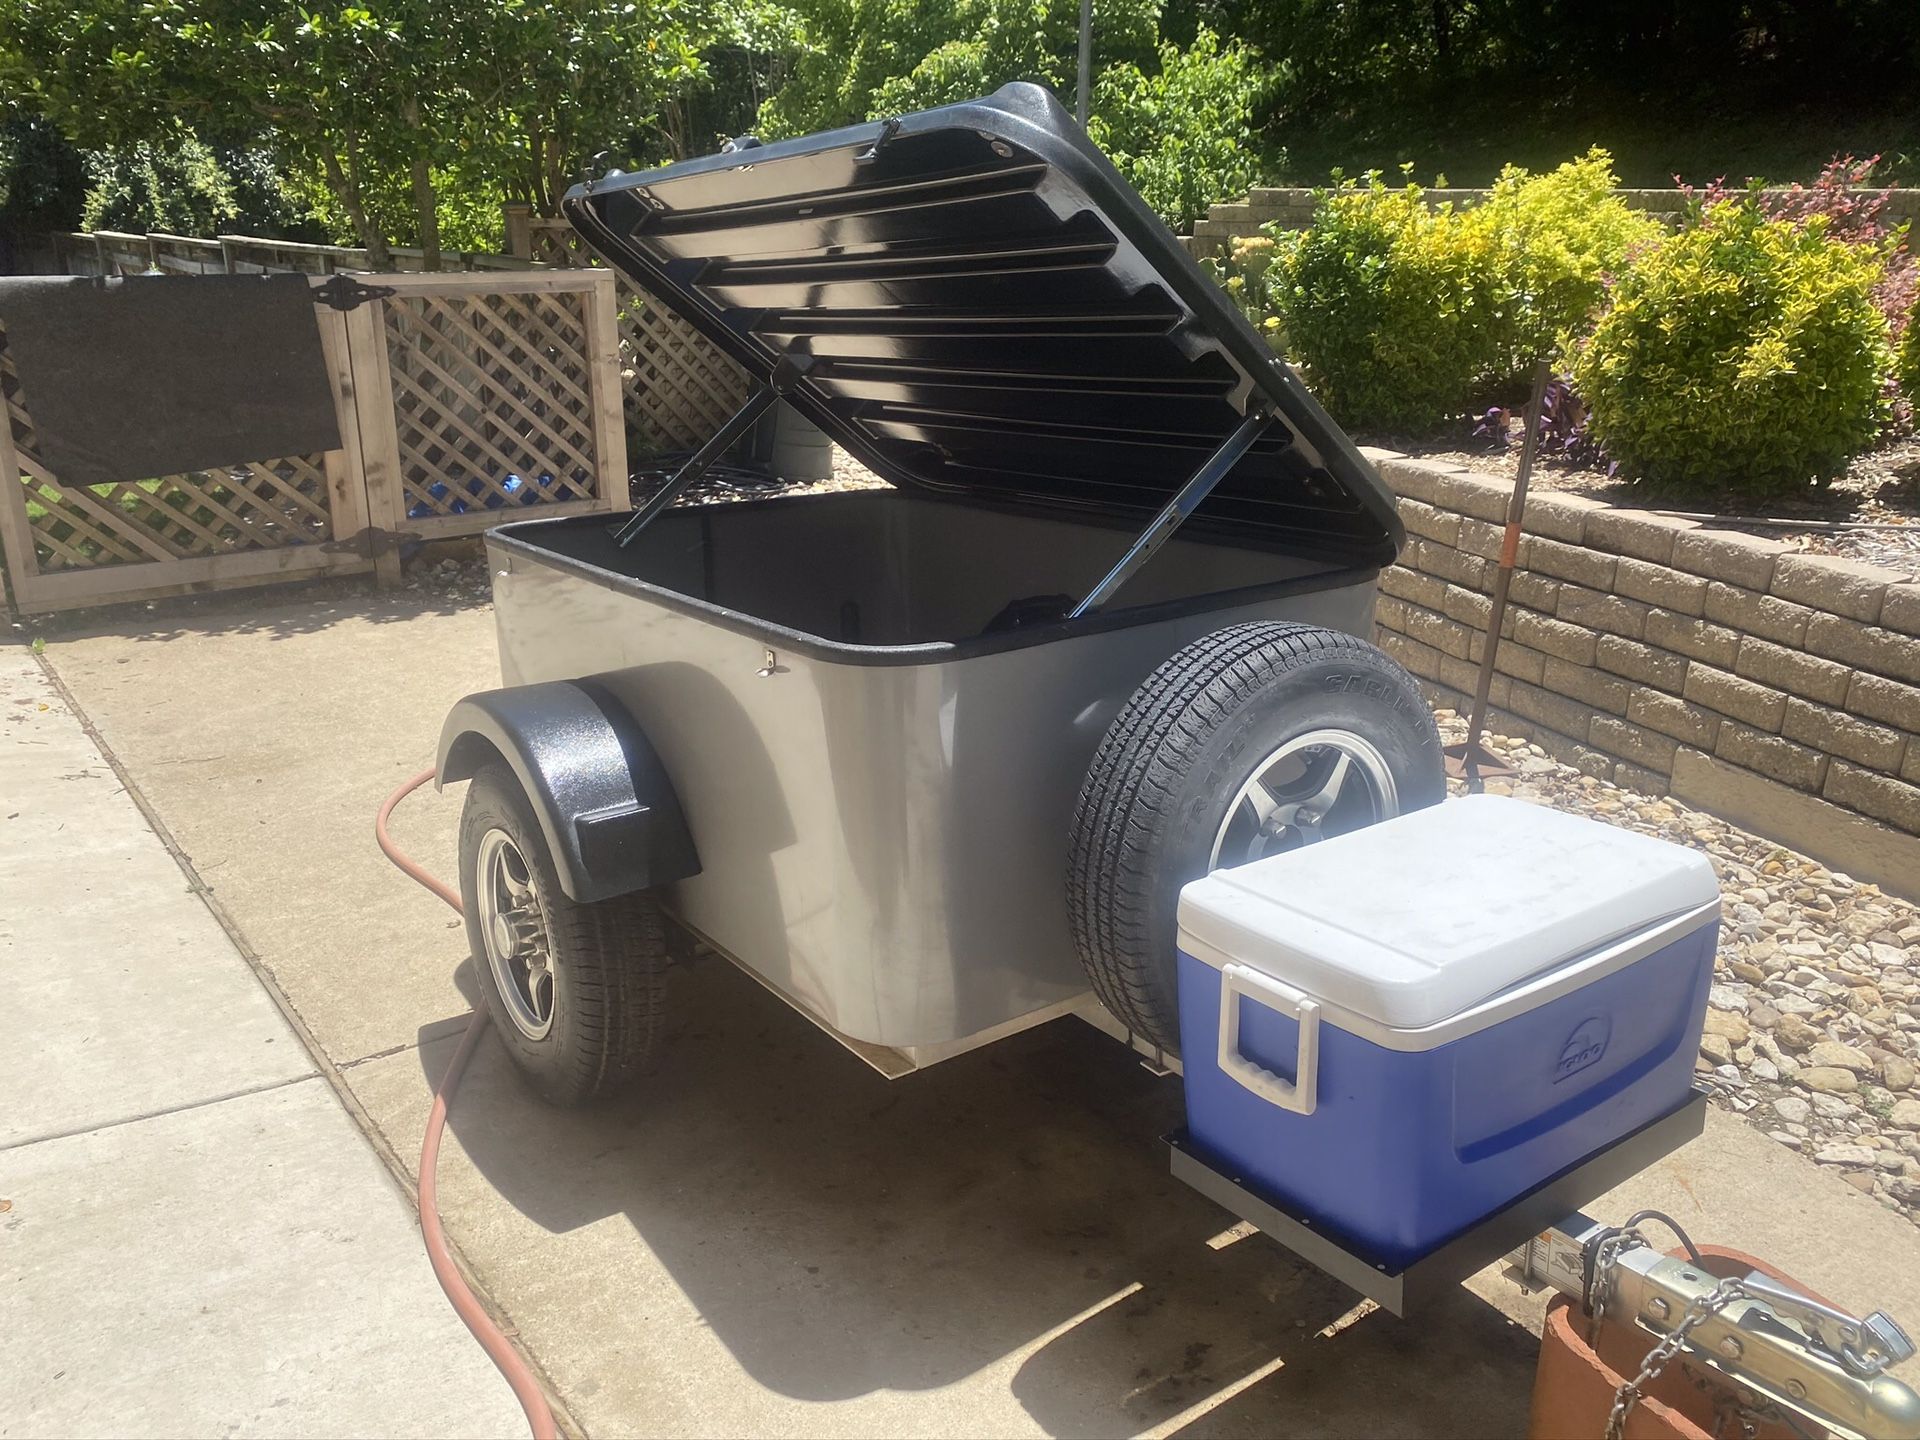 Trailer Travel Trailer for Luggage Small for Car or SUV